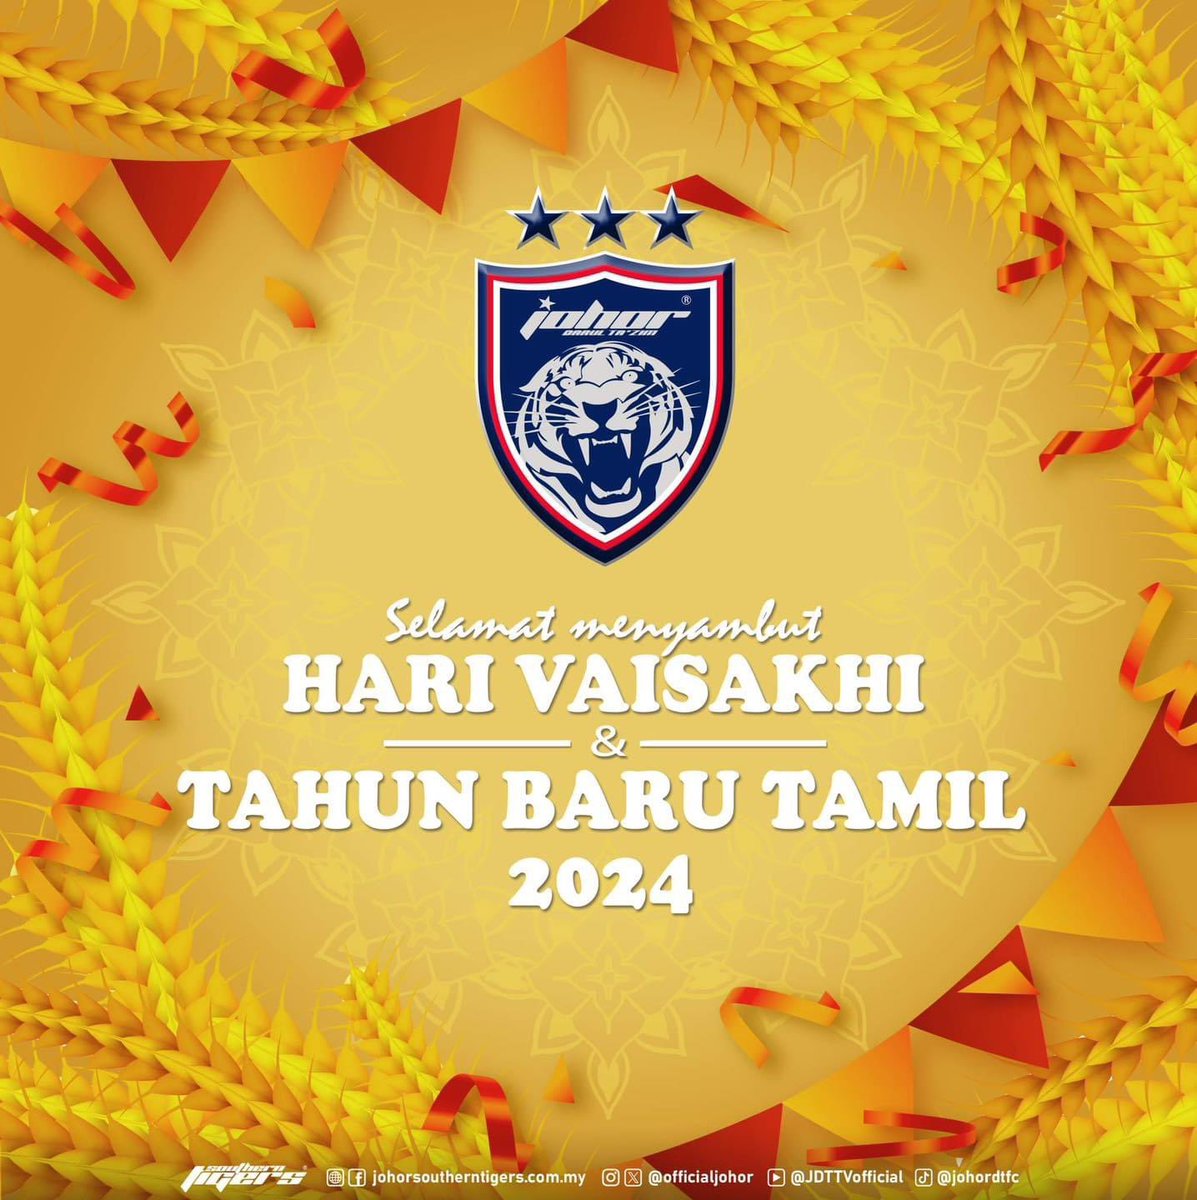 HAPPY VAISAKHI AND TAMIL NEW YEAR Johor Darul Ta'zim FC (JDT) would like to wish a very happy Vaisakhi and Tamil New Year to all Southern Tigers fans celebrating the occasion. May the celebration strengthen our relationship and unity. Luaskan Kuasamu Johor.